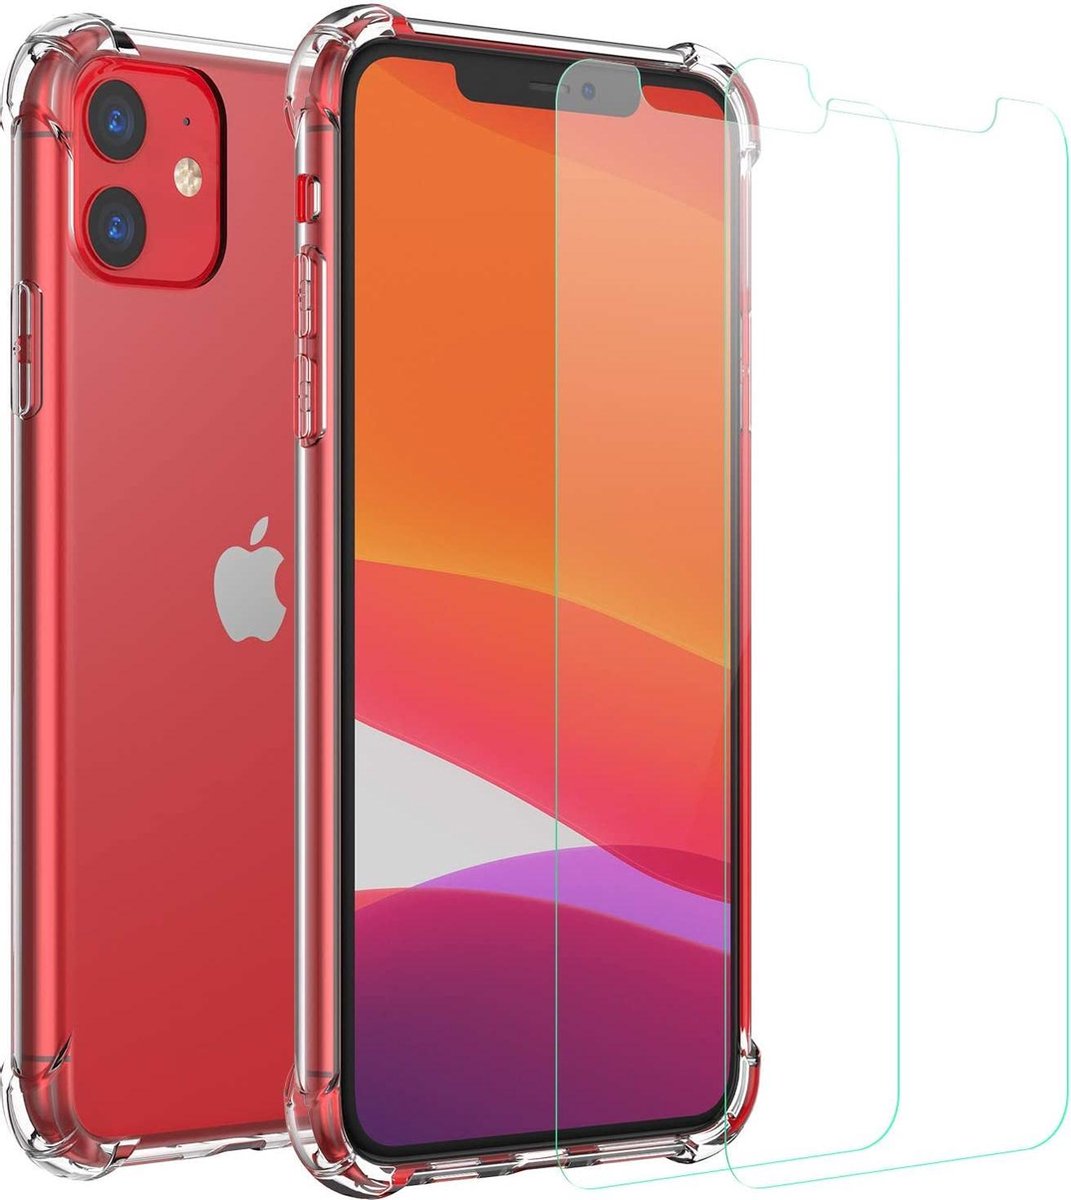 iPhone 11 Hoesje - iPhone 11 Anti Shock Hoesje - iphone 11 siliconen hoesje Case Back Cover - 2x iPhone 11 Screenprotector Tempered Glass Screen Protector Glas